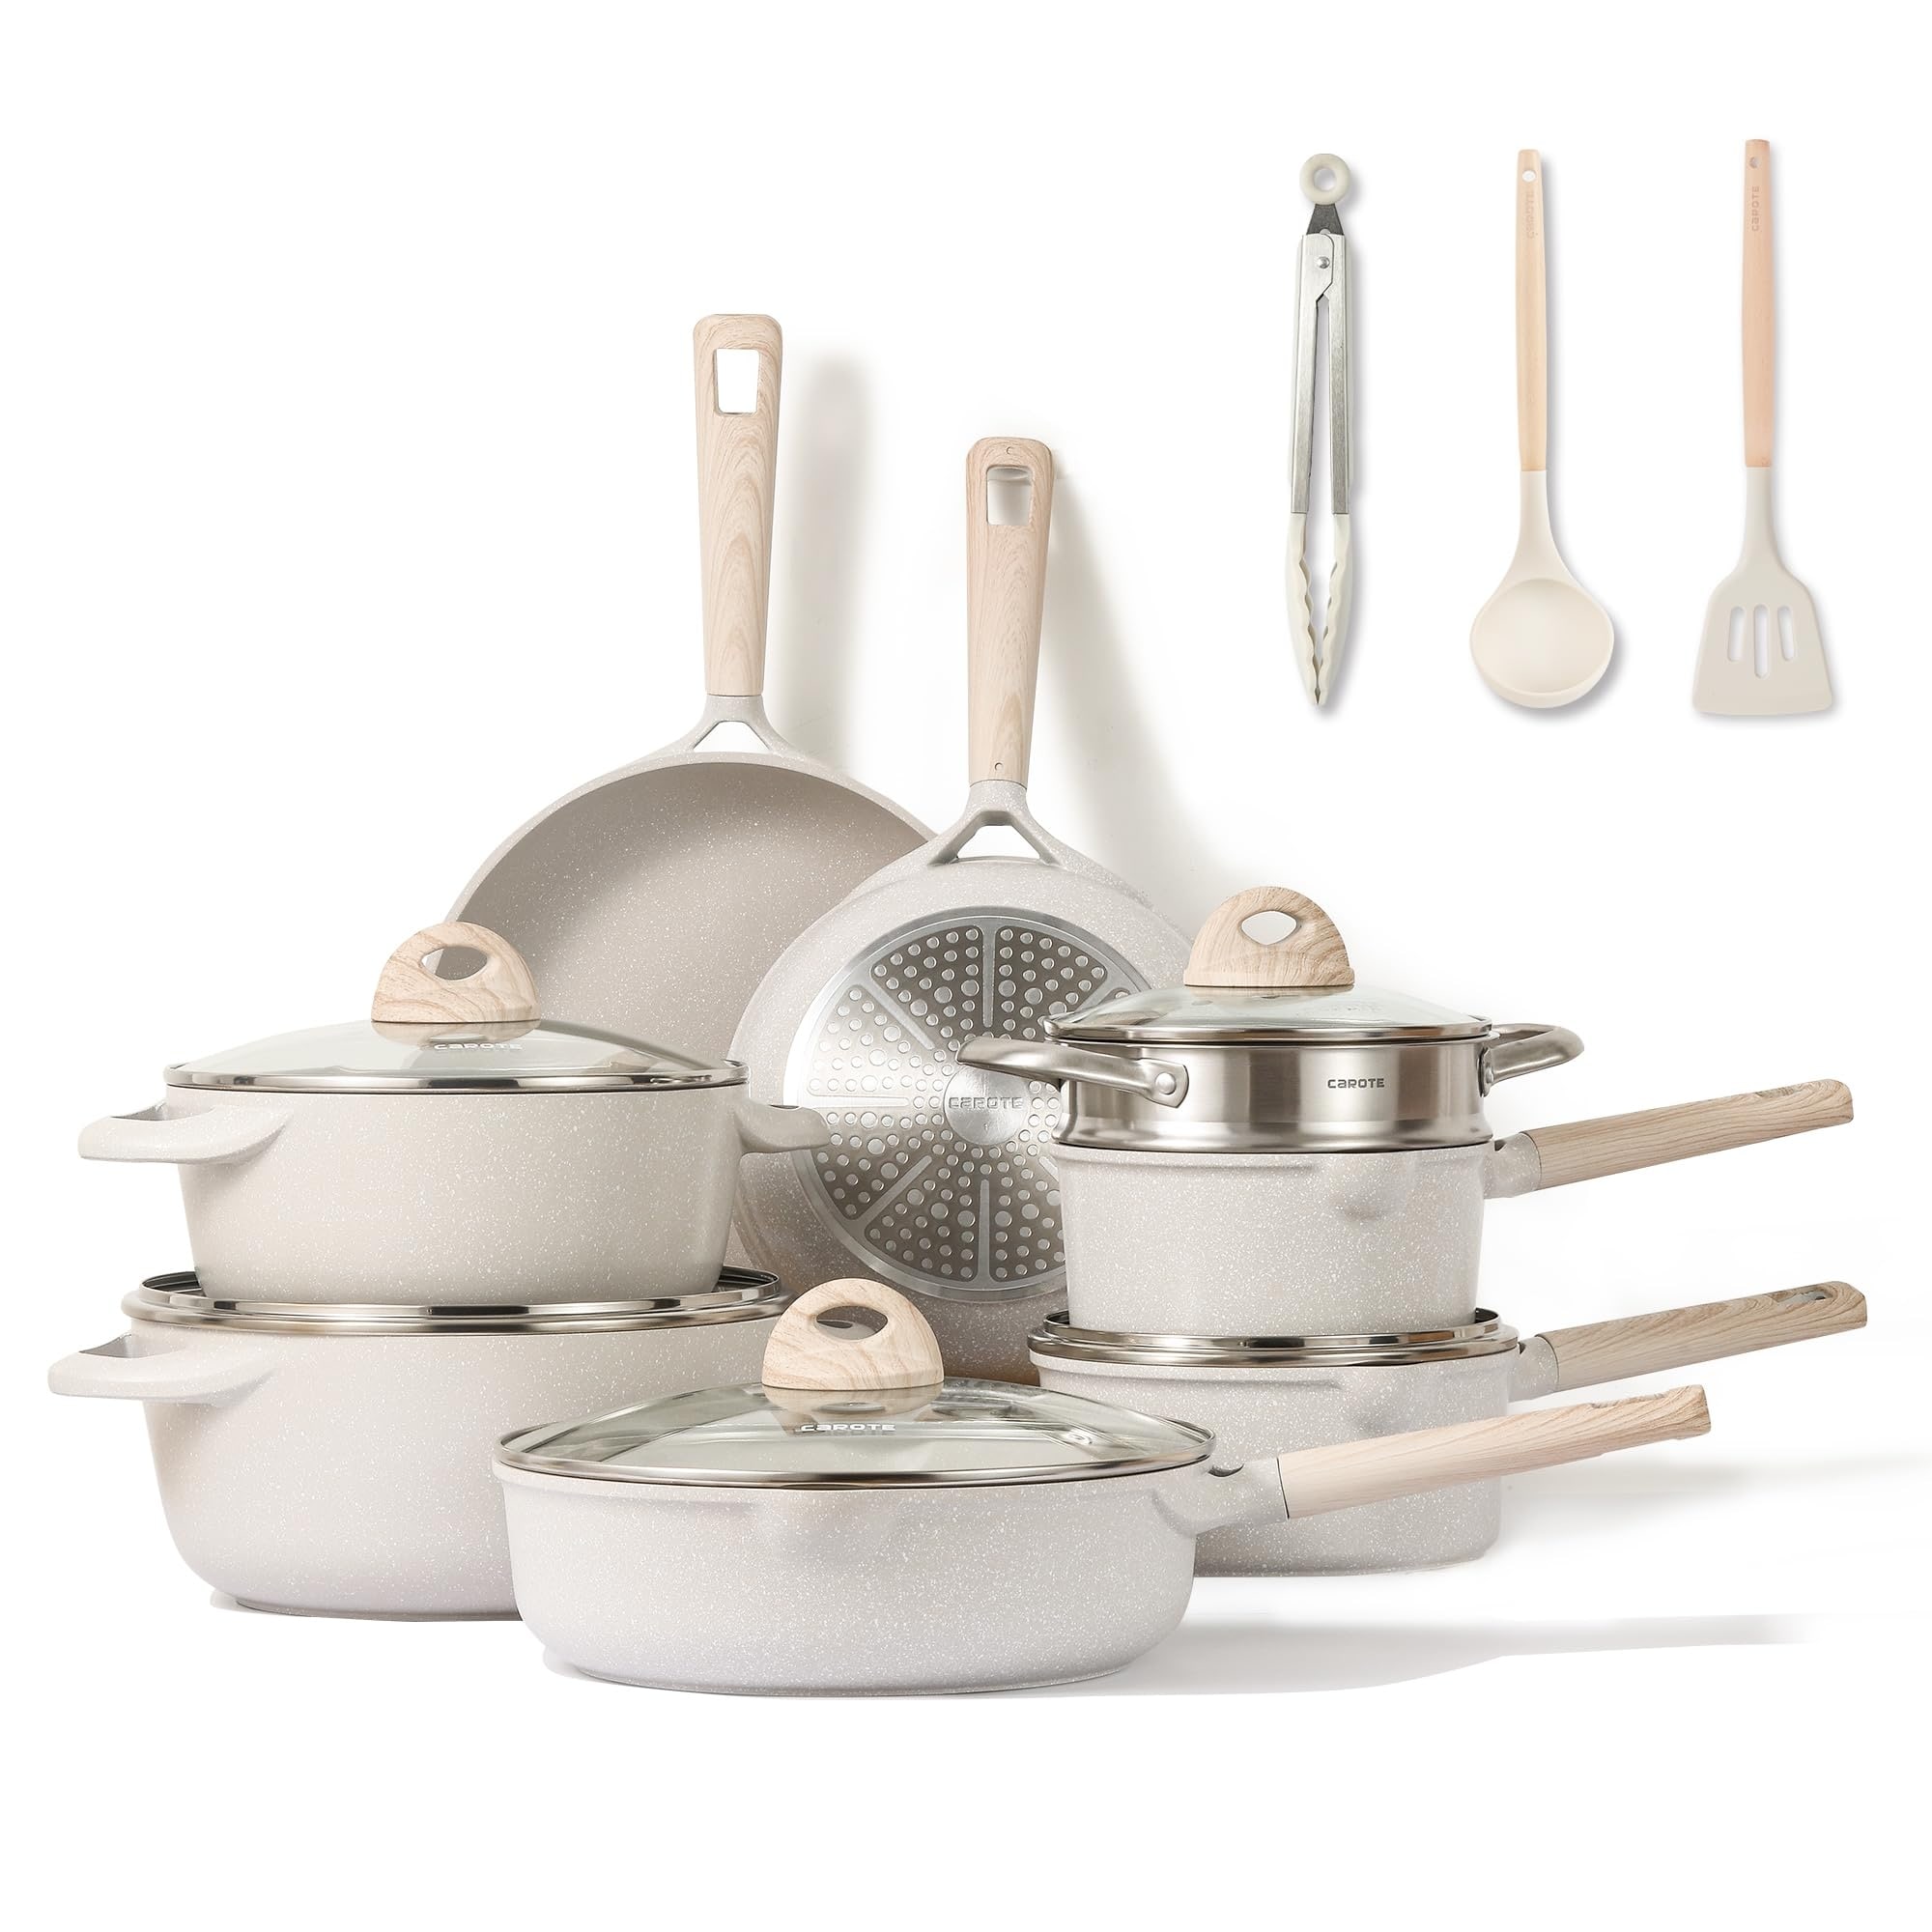 https://ak1.ostkcdn.com/images/products/is/images/direct/f8c31b6adc0204ccac35248ed2b6b48e0b759ffa/16pcs-Pots-and-Pans-Set%2C-Nonstick-Cookware-Sets%2C-Kitchen-Induction-Pots-and-Pans-Cooking-Sets%2C-Pan-Sets-for-Cooking.jpg